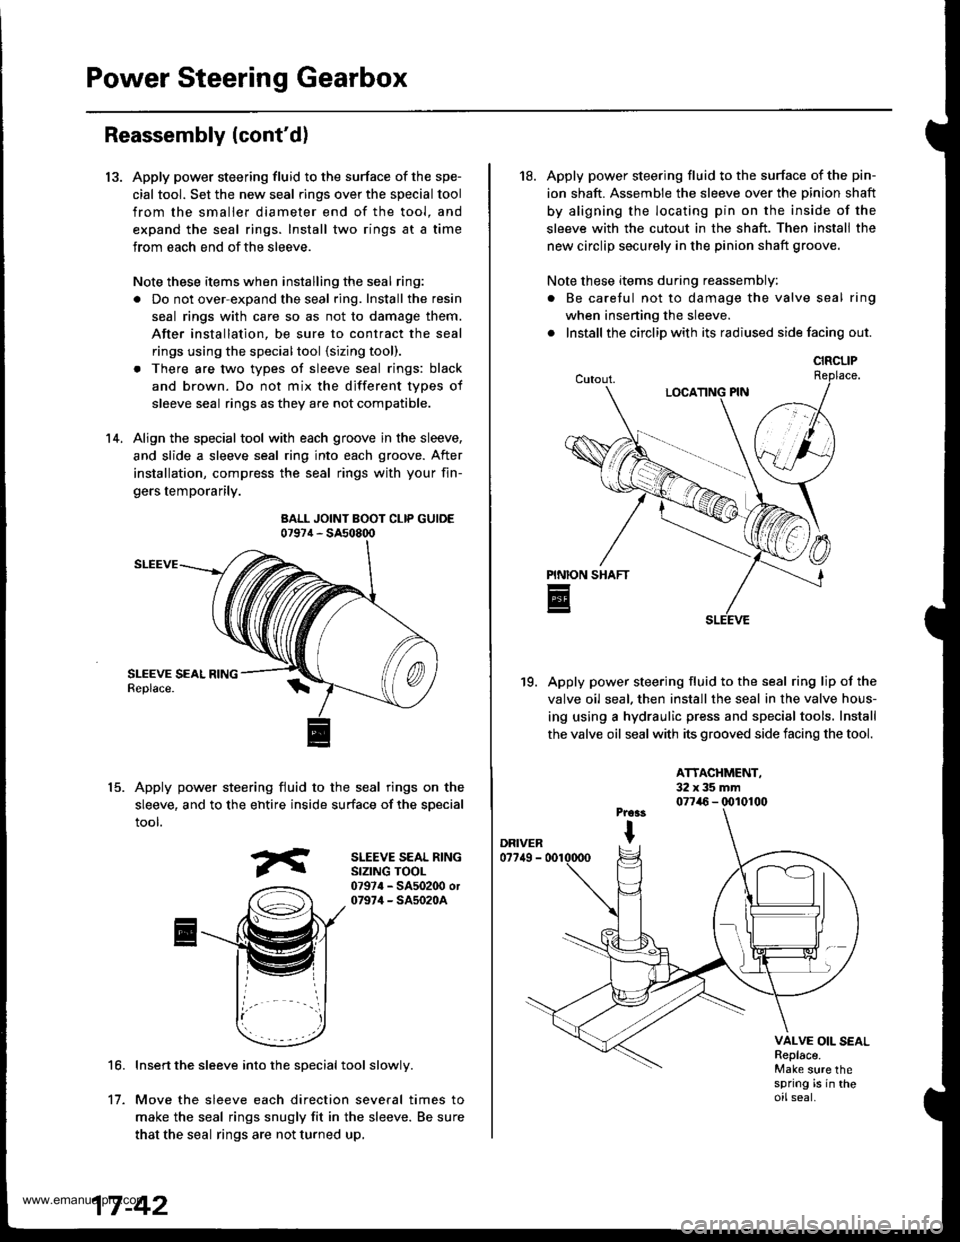 HONDA CR-V 1998 RD1-RD3 / 1.G User Guide 
Power Steering Gearbox
13.
Reassembly (contd)
Apply power steering fluid to the surface of the spe-
cial tool. Set the new seal rings over the special tool
from the smaller diameter end of the tool.